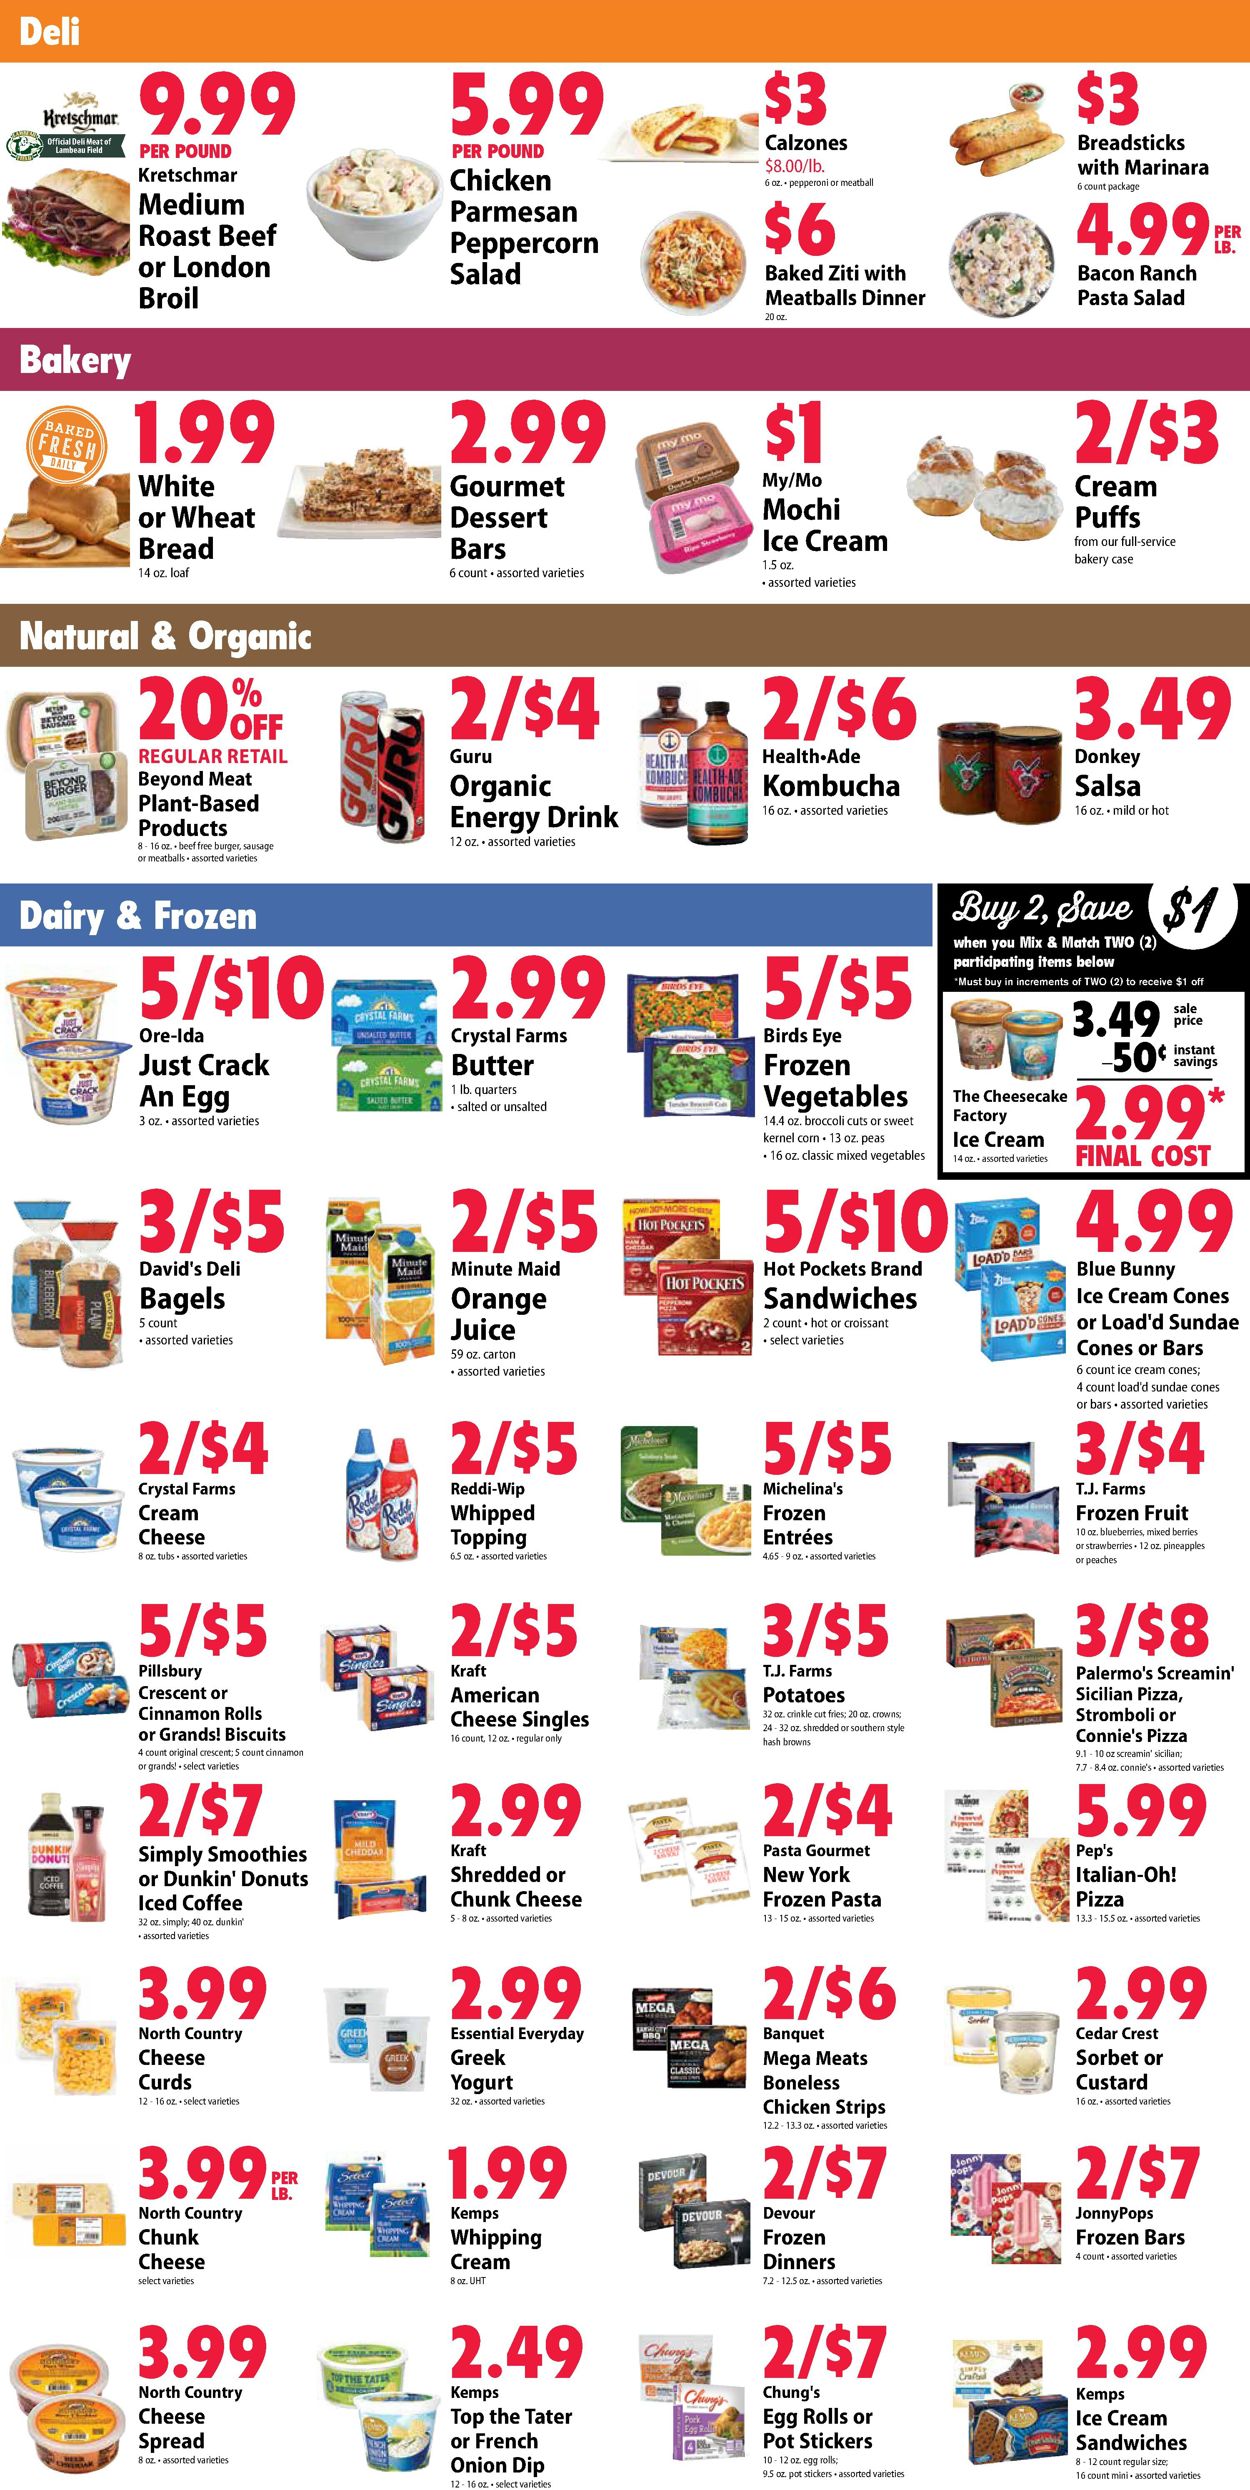 Festival Foods Current weekly ad 07/21 - 07/27/2021 [4] - frequent-ads.com